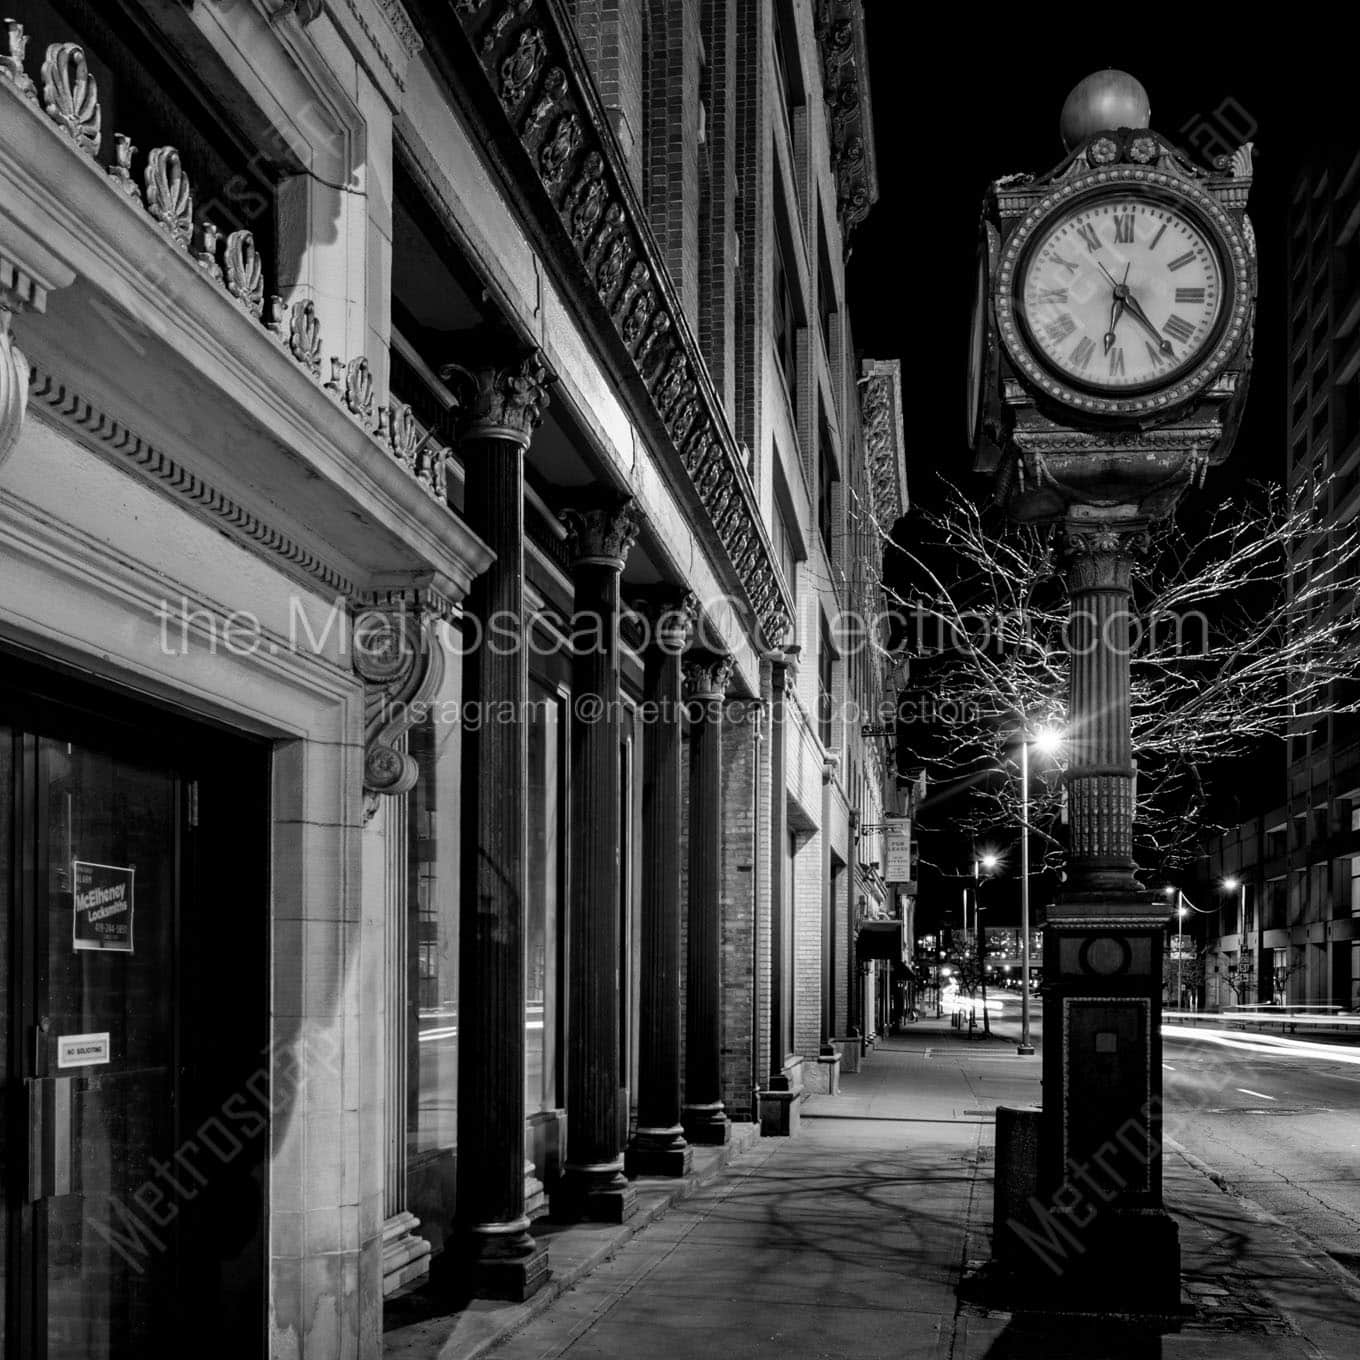 clock on summit fort industry square Black & White Office Art